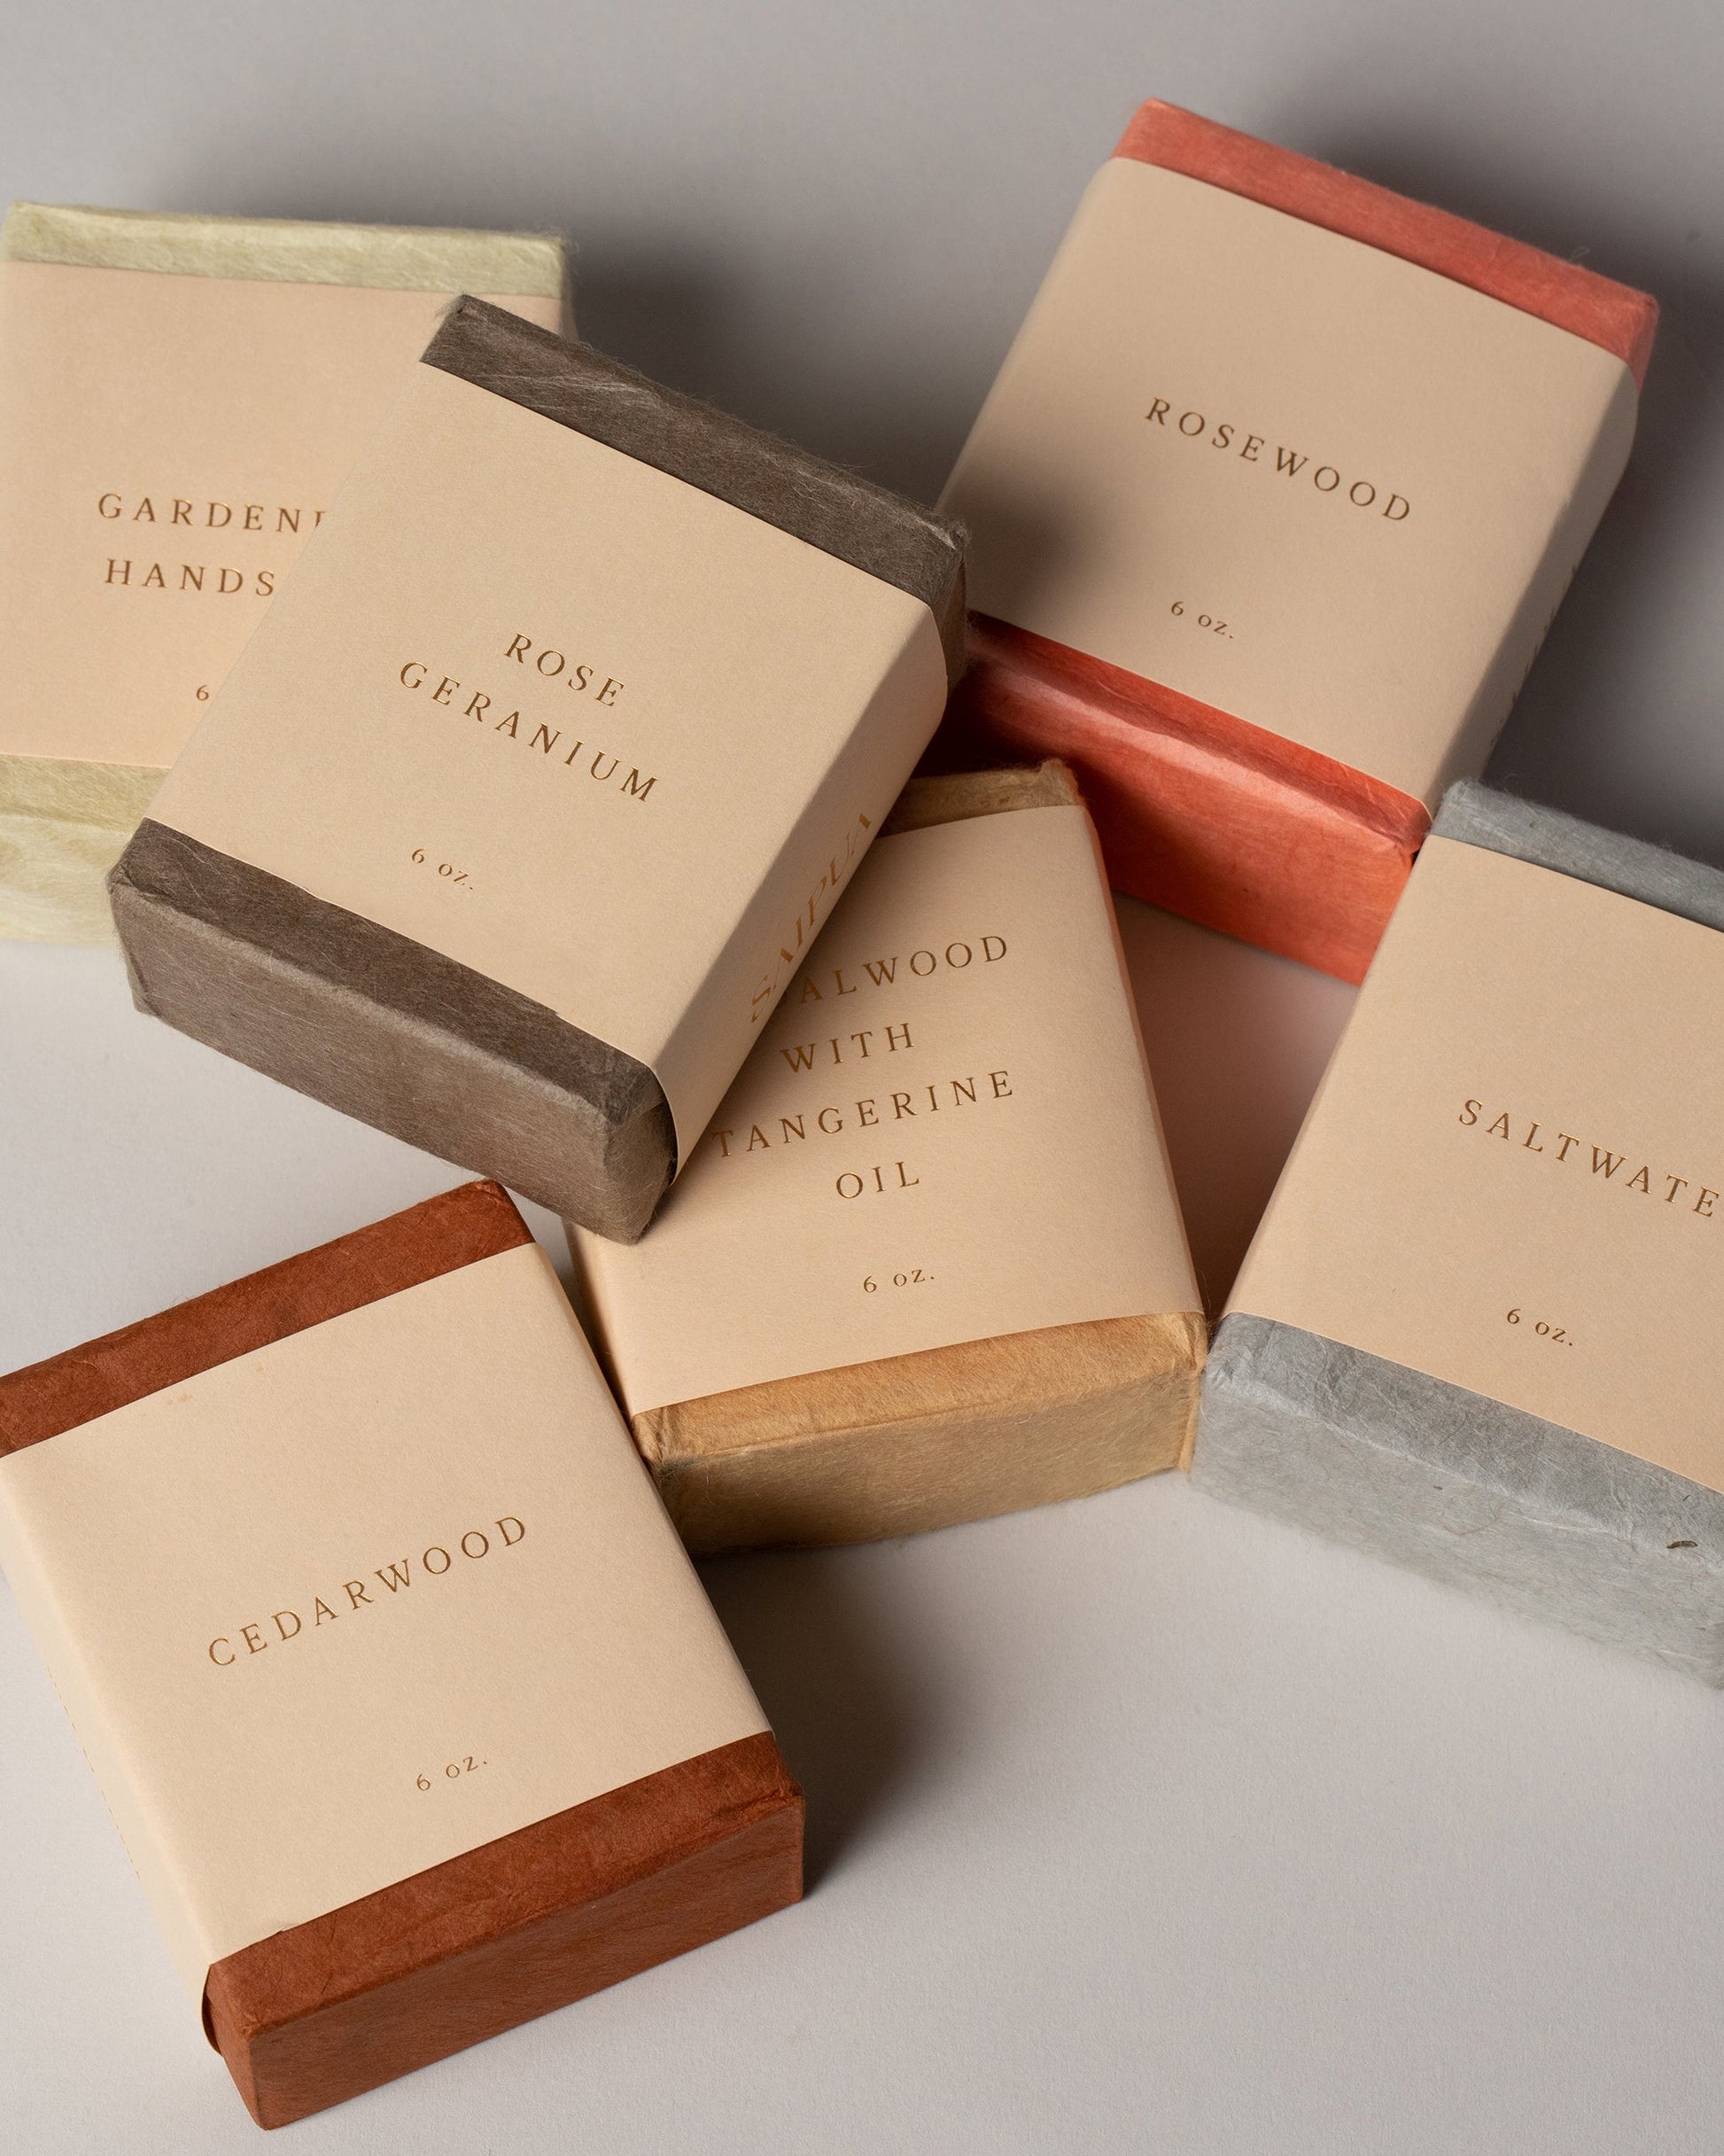 Styled image featuring the Saipua Gardenia, Rose Geranium, Rosewood, Sandalwood with Tangerine Oil, Saltwater and Cedarwood Soaps.